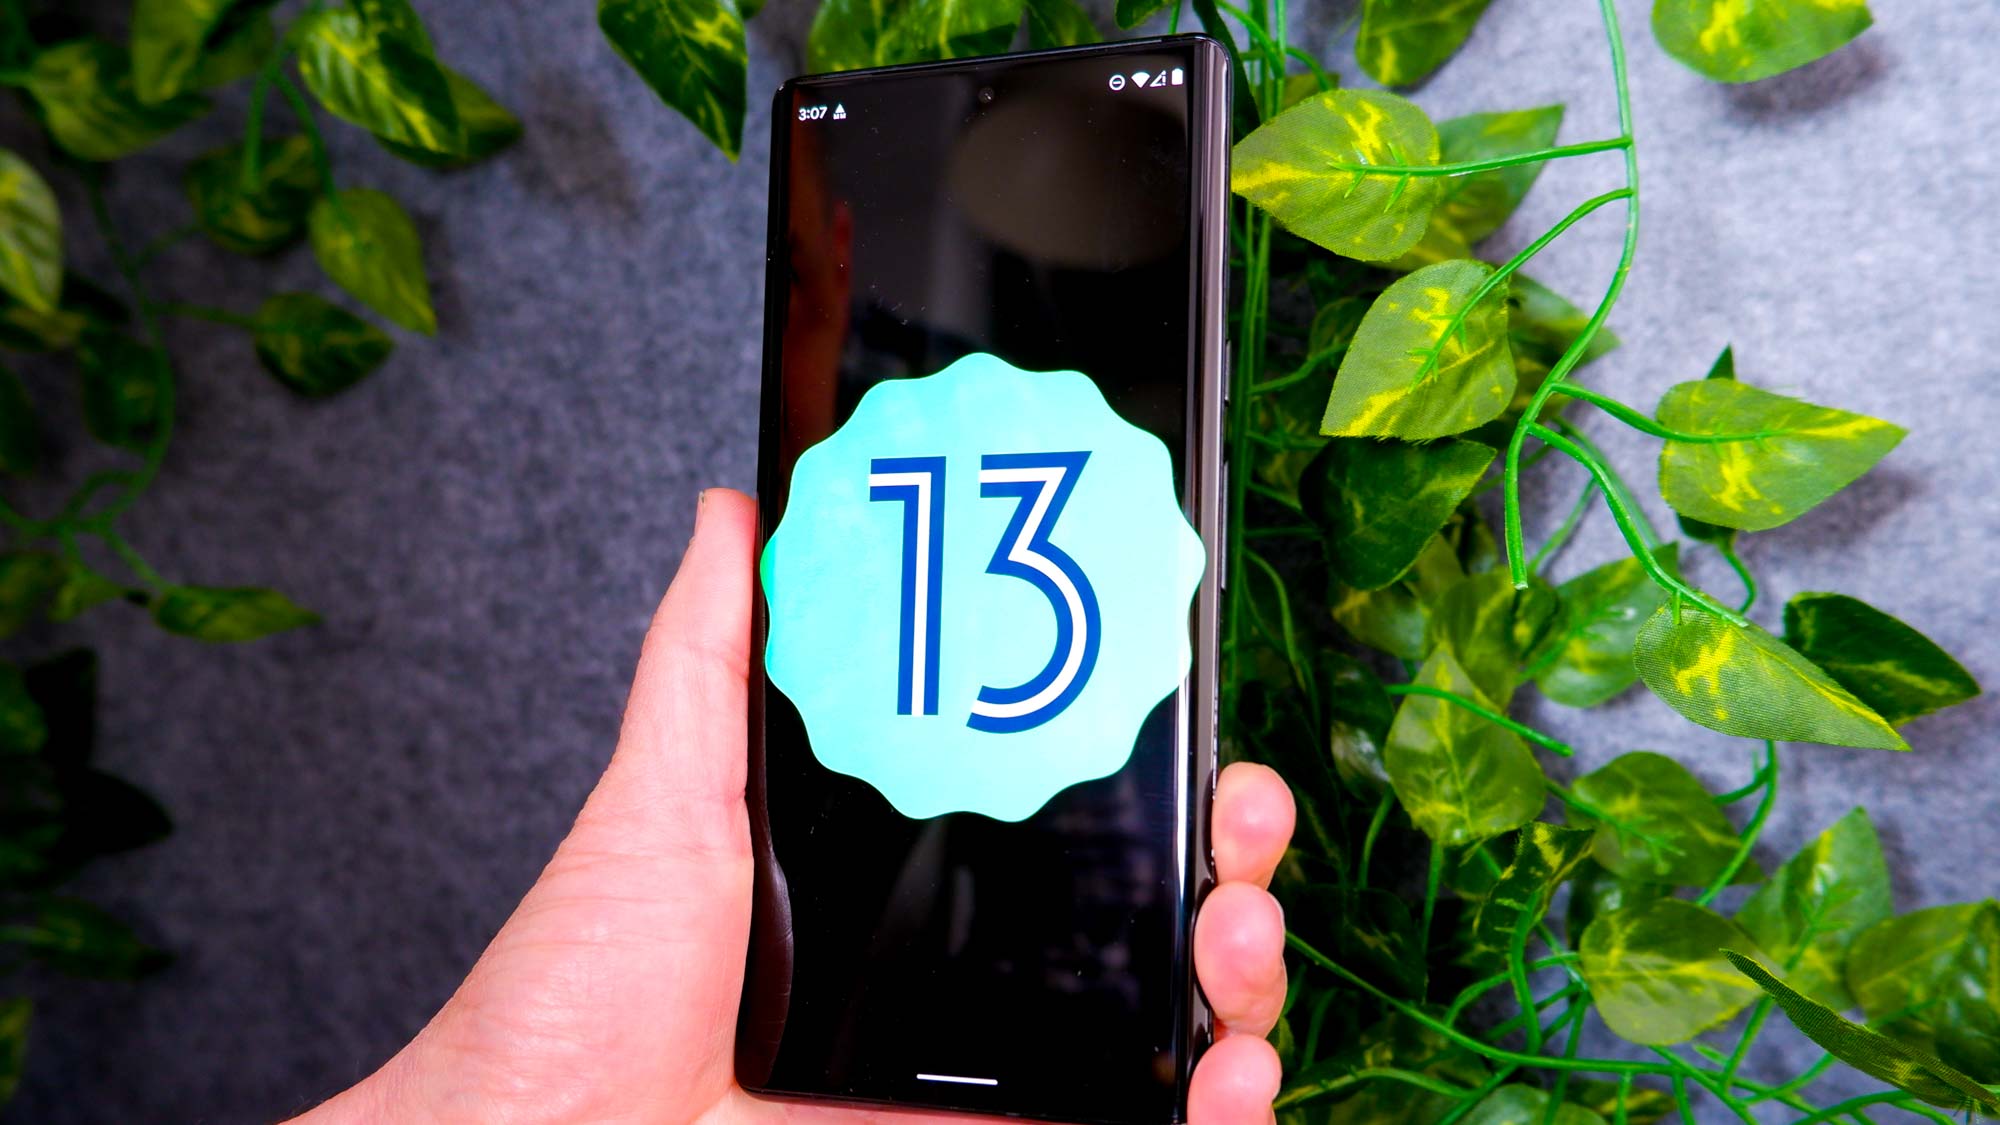 Android 13 logo on a smartphone